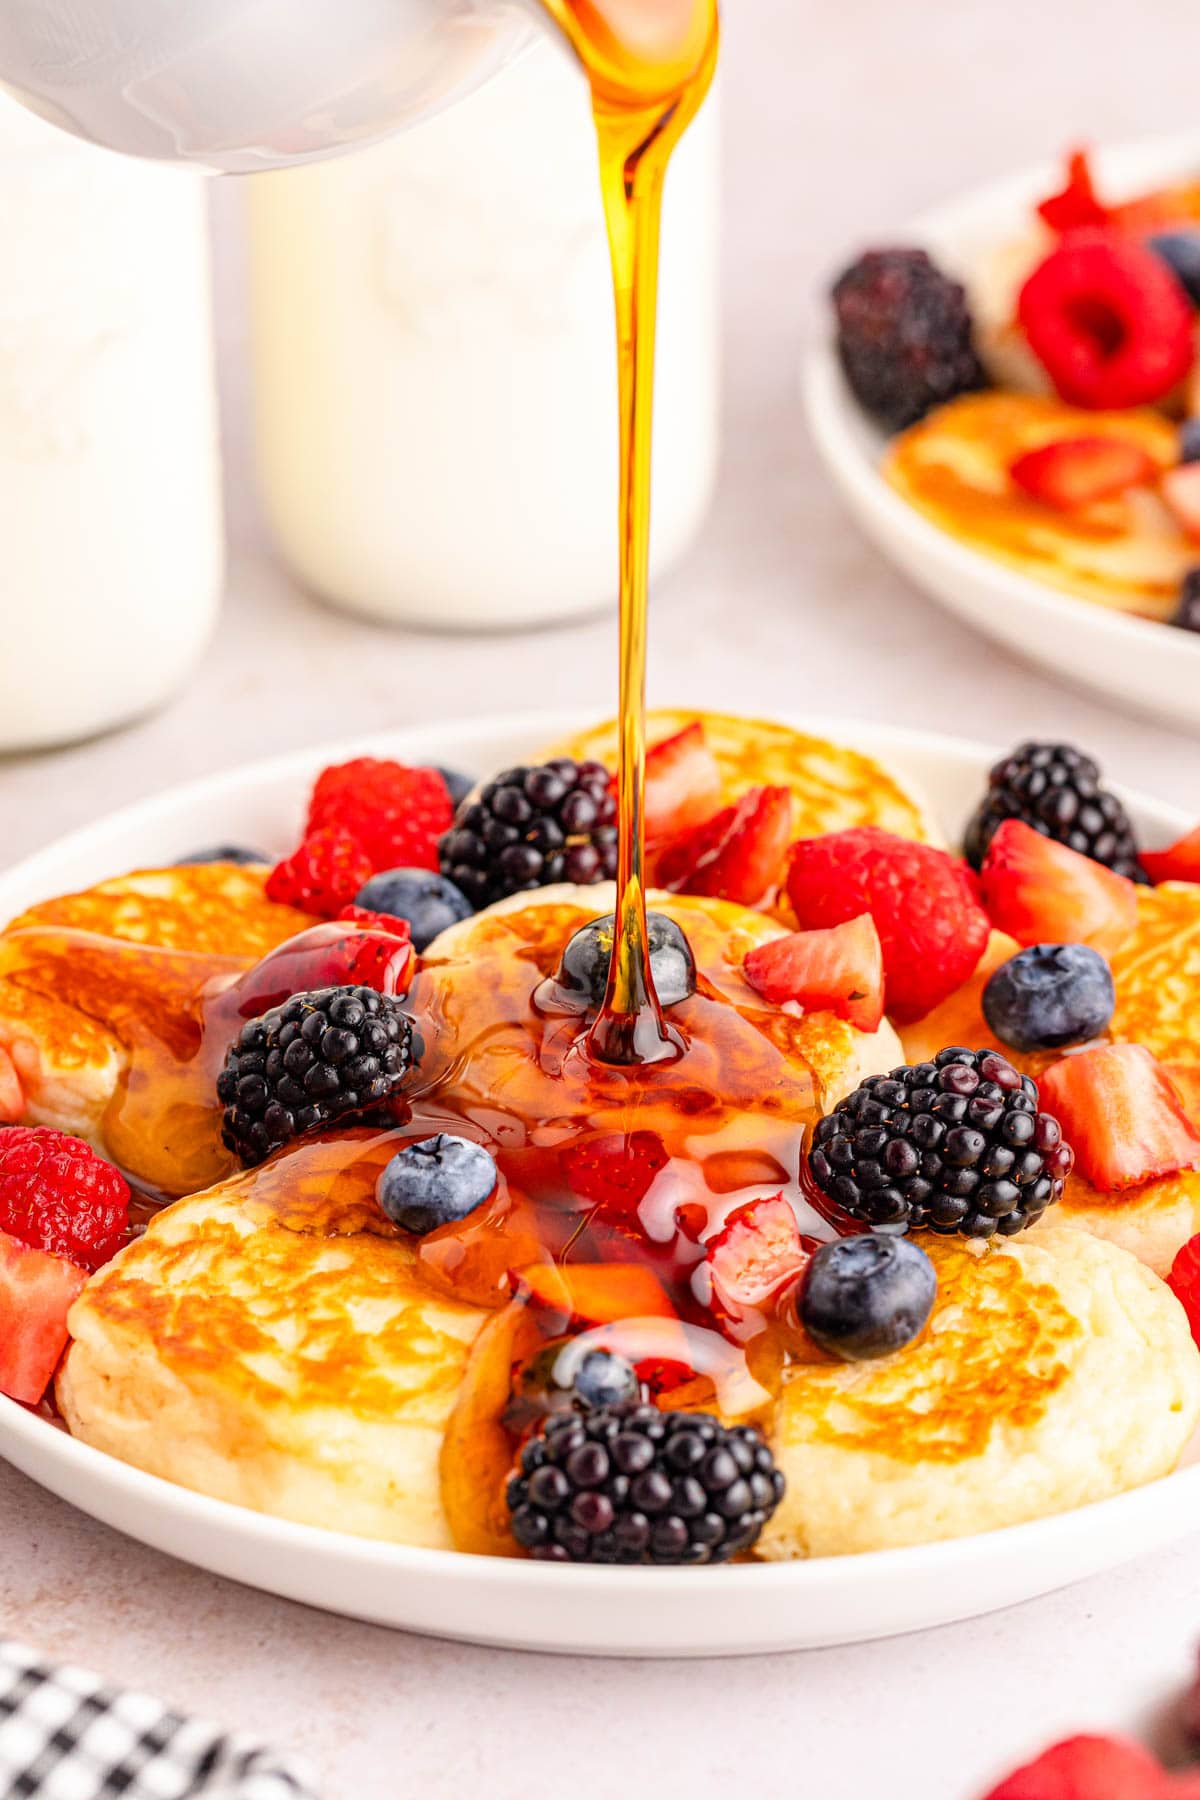 Pancakes with berries and syrup being poured over them.